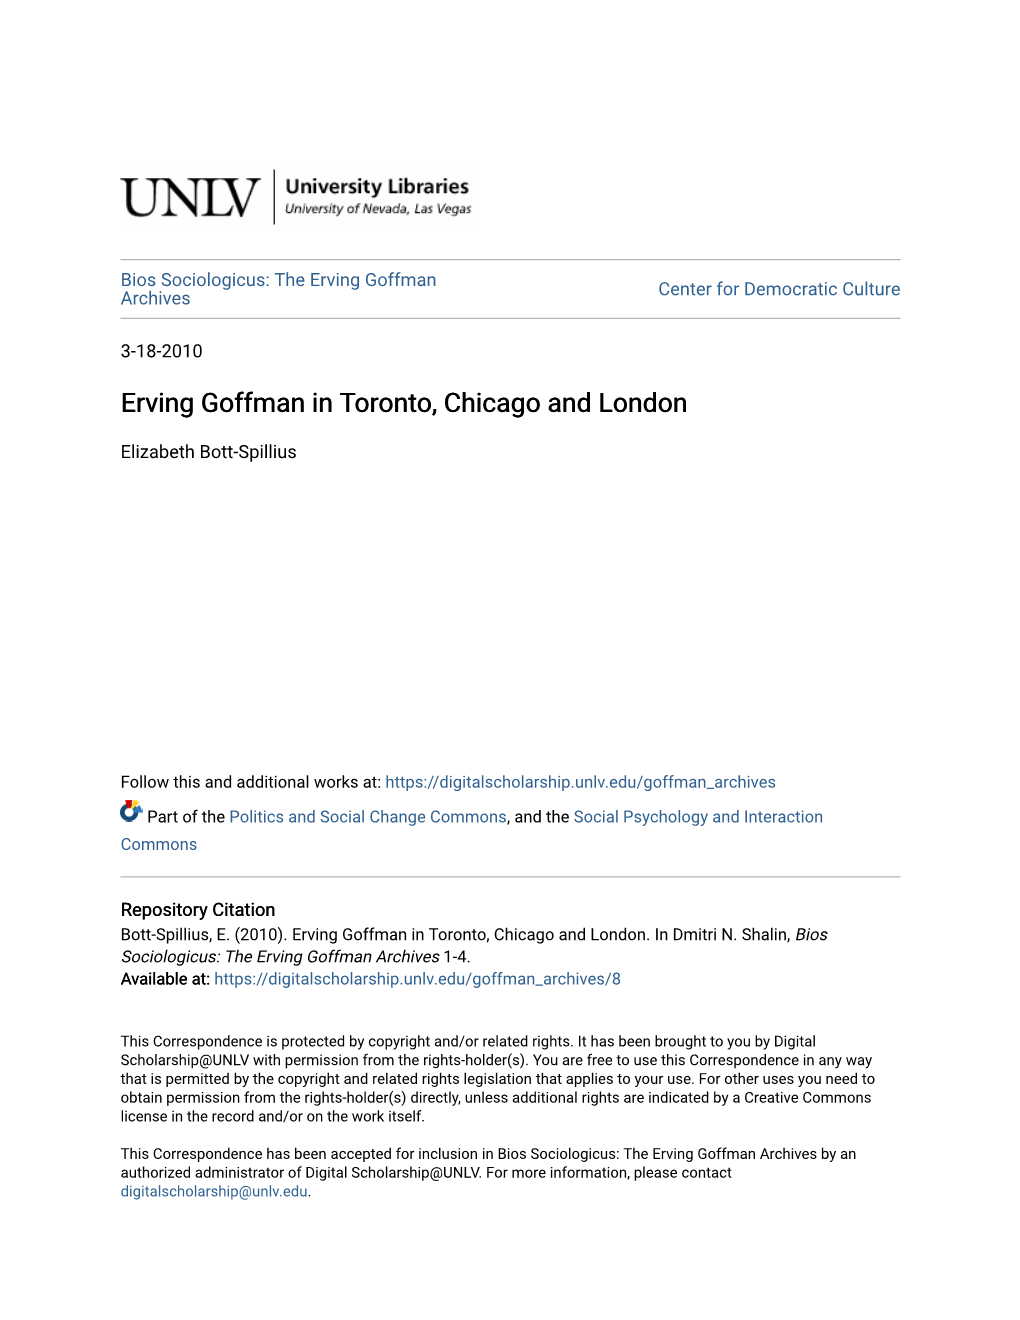 Erving Goffman in Toronto, Chicago and London